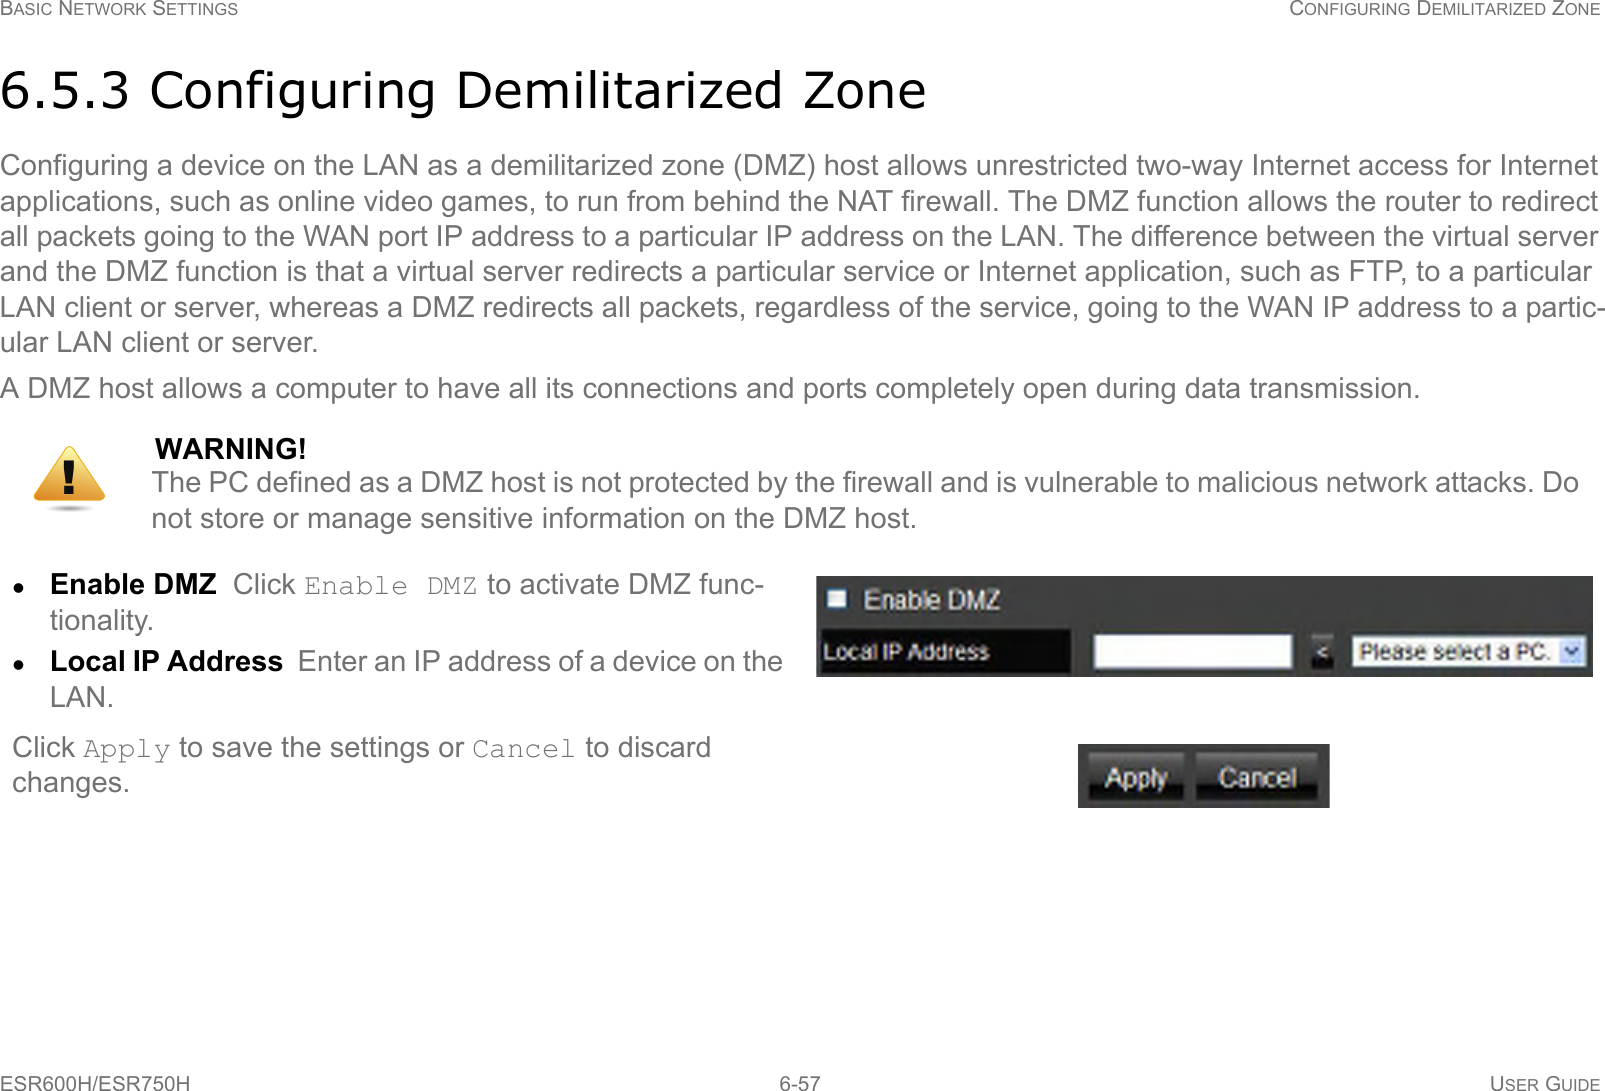 BASIC NETWORK SETTINGS CONFIGURING DEMILITARIZED ZONEESR600H/ESR750H 6-57 USER GUIDE6.5.3 Configuring Demilitarized ZoneConfiguring a device on the LAN as a demilitarized zone (DMZ) host allows unrestricted two-way Internet access for Internet applications, such as online video games, to run from behind the NAT firewall. The DMZ function allows the router to redirect all packets going to the WAN port IP address to a particular IP address on the LAN. The difference between the virtual server and the DMZ function is that a virtual server redirects a particular service or Internet application, such as FTP, to a particular LAN client or server, whereas a DMZ redirects all packets, regardless of the service, going to the WAN IP address to a partic-ular LAN client or server.A DMZ host allows a computer to have all its connections and ports completely open during data transmission.WARNING!The PC defined as a DMZ host is not protected by the firewall and is vulnerable to malicious network attacks. Do  not store or manage sensitive information on the DMZ host.Enable DMZ  Click Enable DMZ to activate DMZ func-tionality.Local IP Address  Enter an IP address of a device on the LAN.Click Apply to save the settings or Cancel to discard changes.!